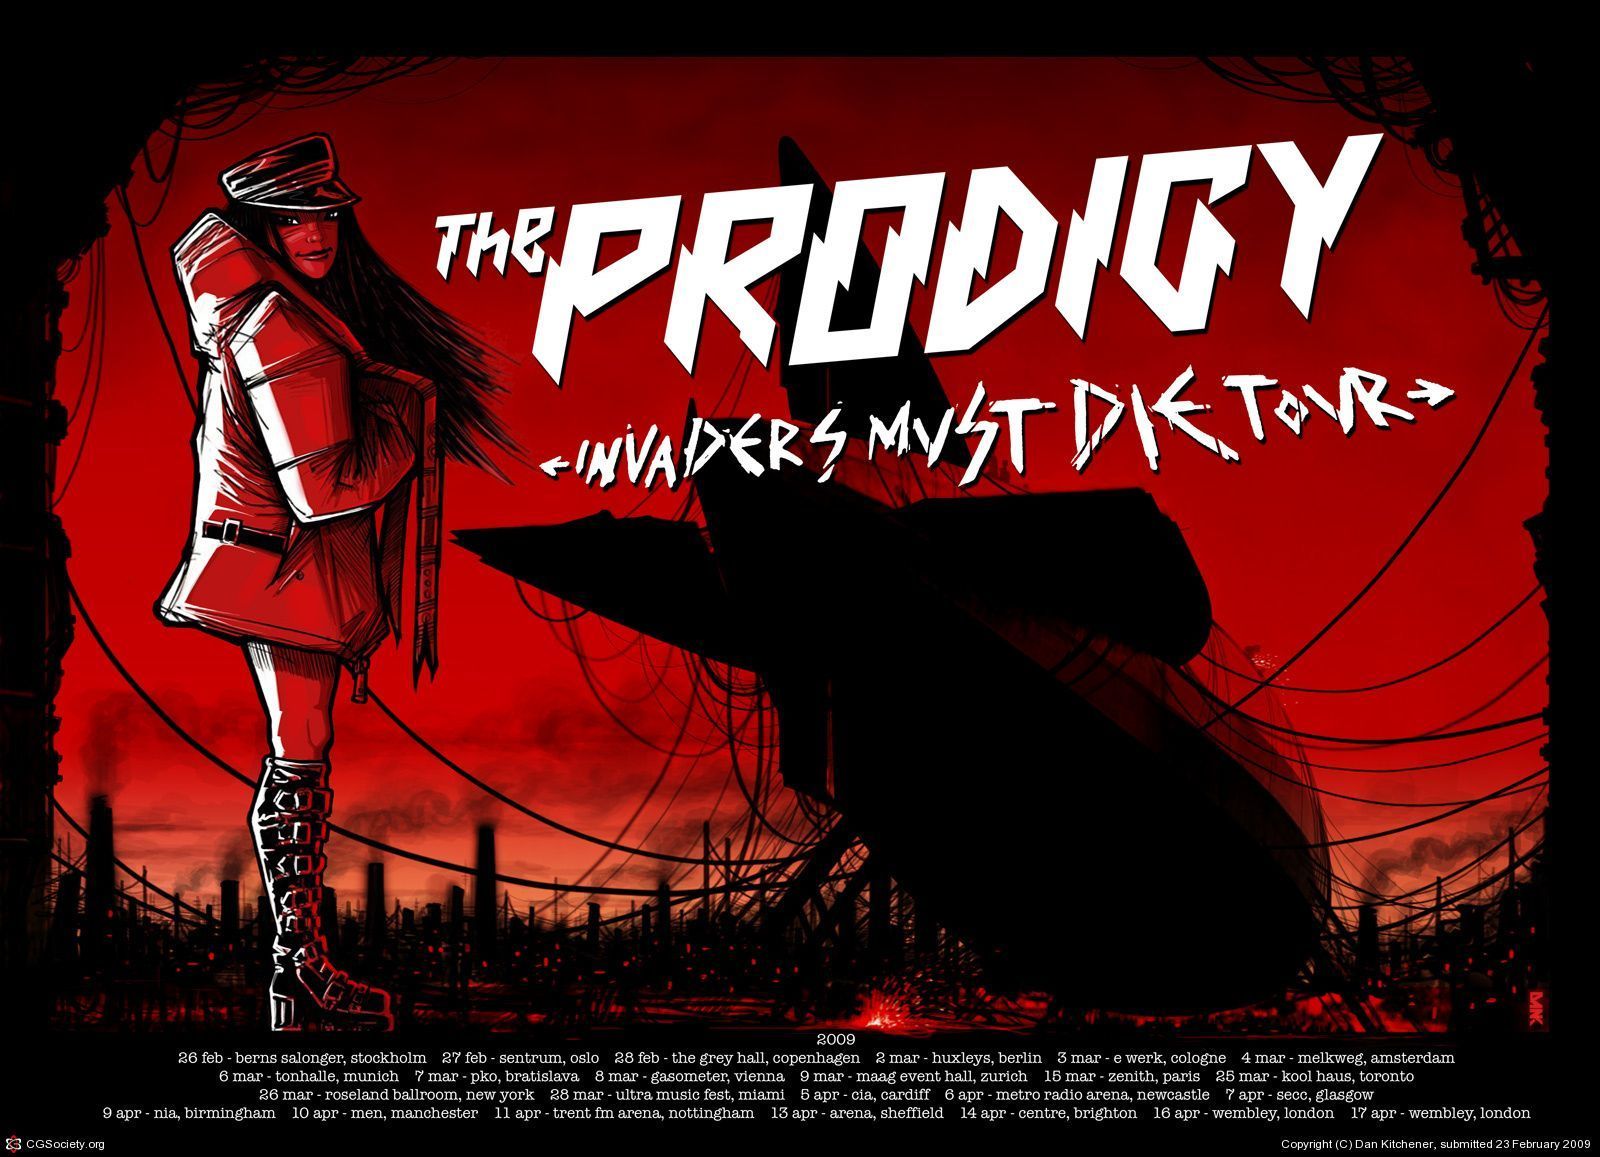 The Prodigy Wallpapers The Prodigy Fanboy - Liam Howlett Keith